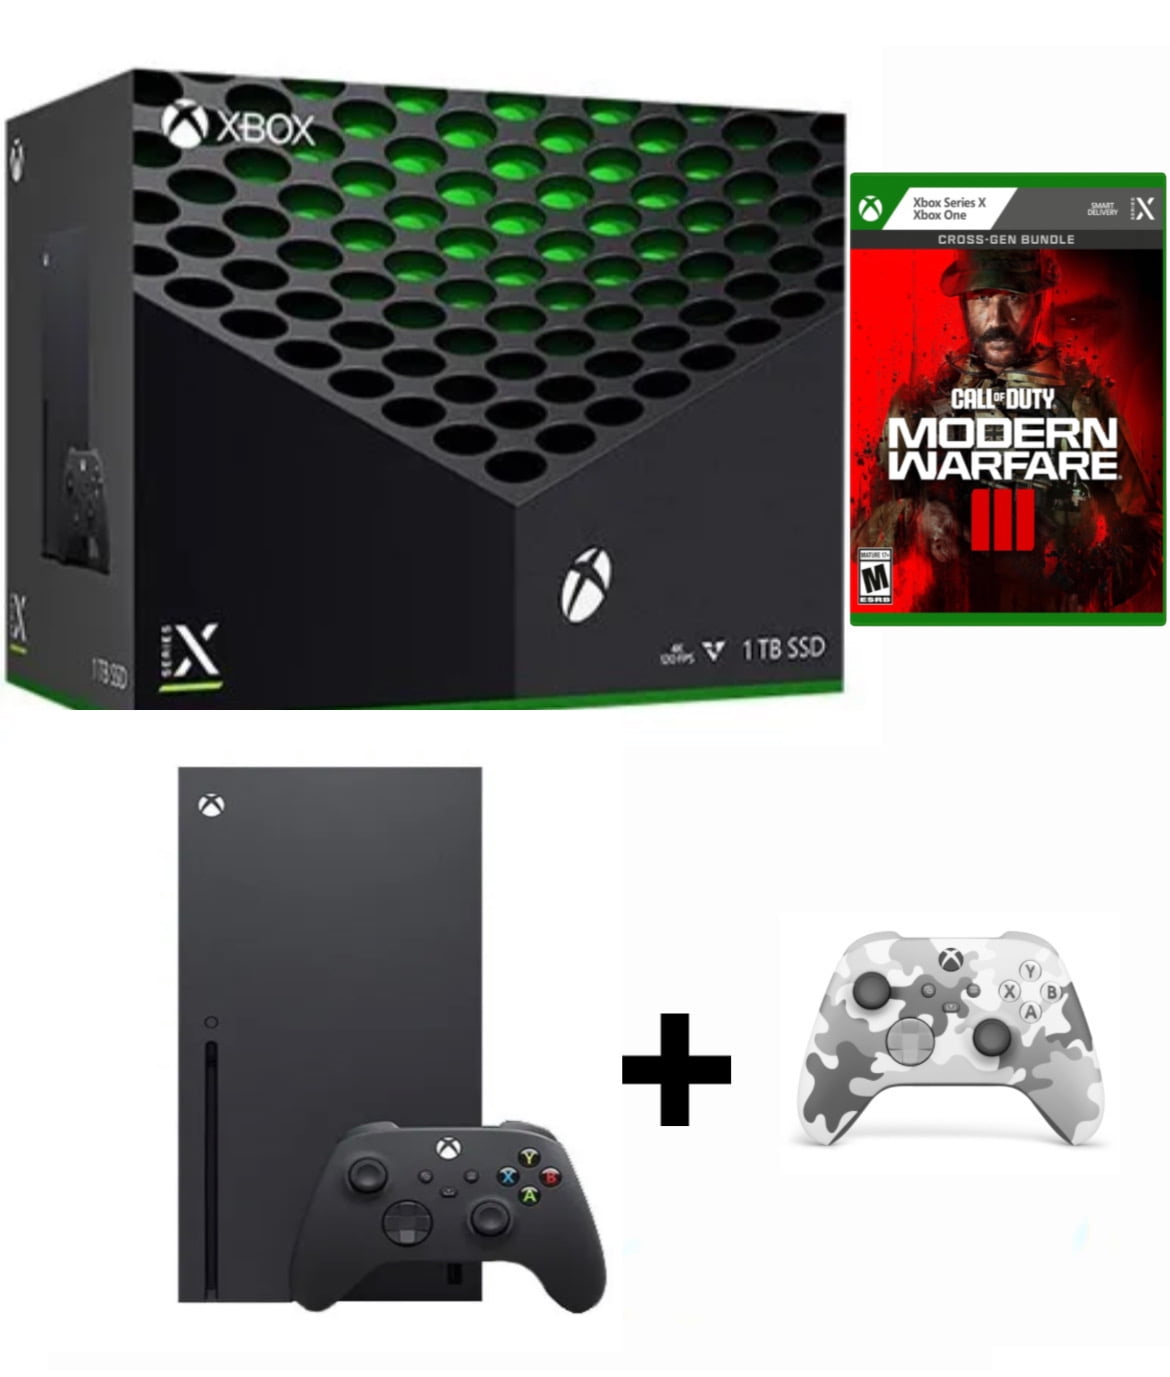 X019: The Complete Lineup of Xbox Black Friday Deals: Bundles, Xbox Game  Pass, Games, Accessories and More - Xbox Wire